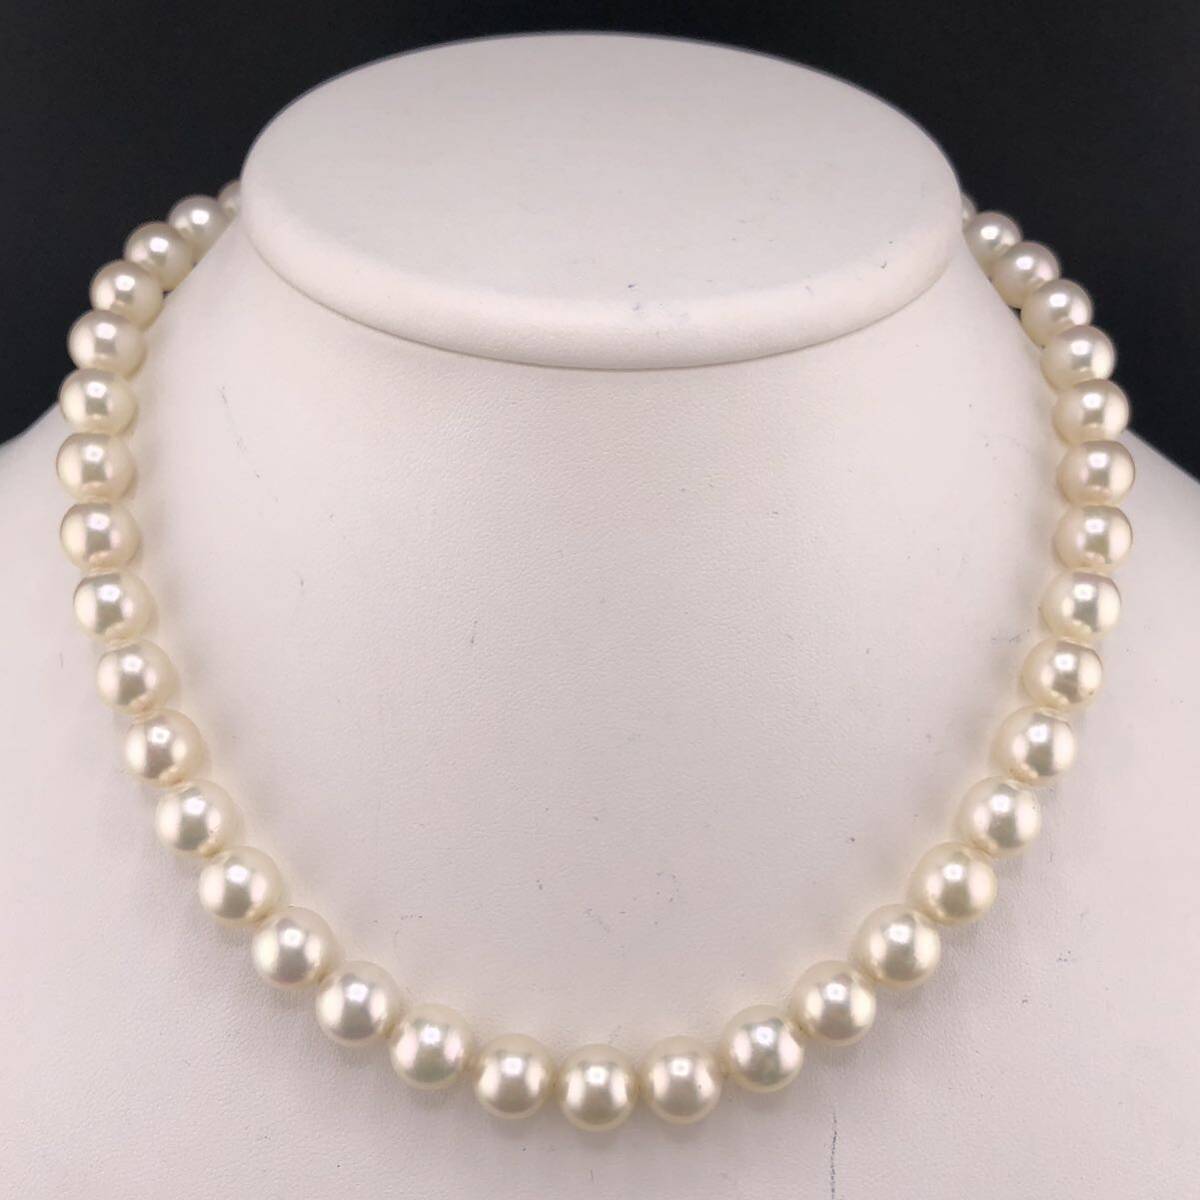 E04-5742 大玉☆アコヤパールネックレス 9.0mm~9.5mm 40cm 53g ( アコヤ真珠 Pearl necklace K14WG )の画像1